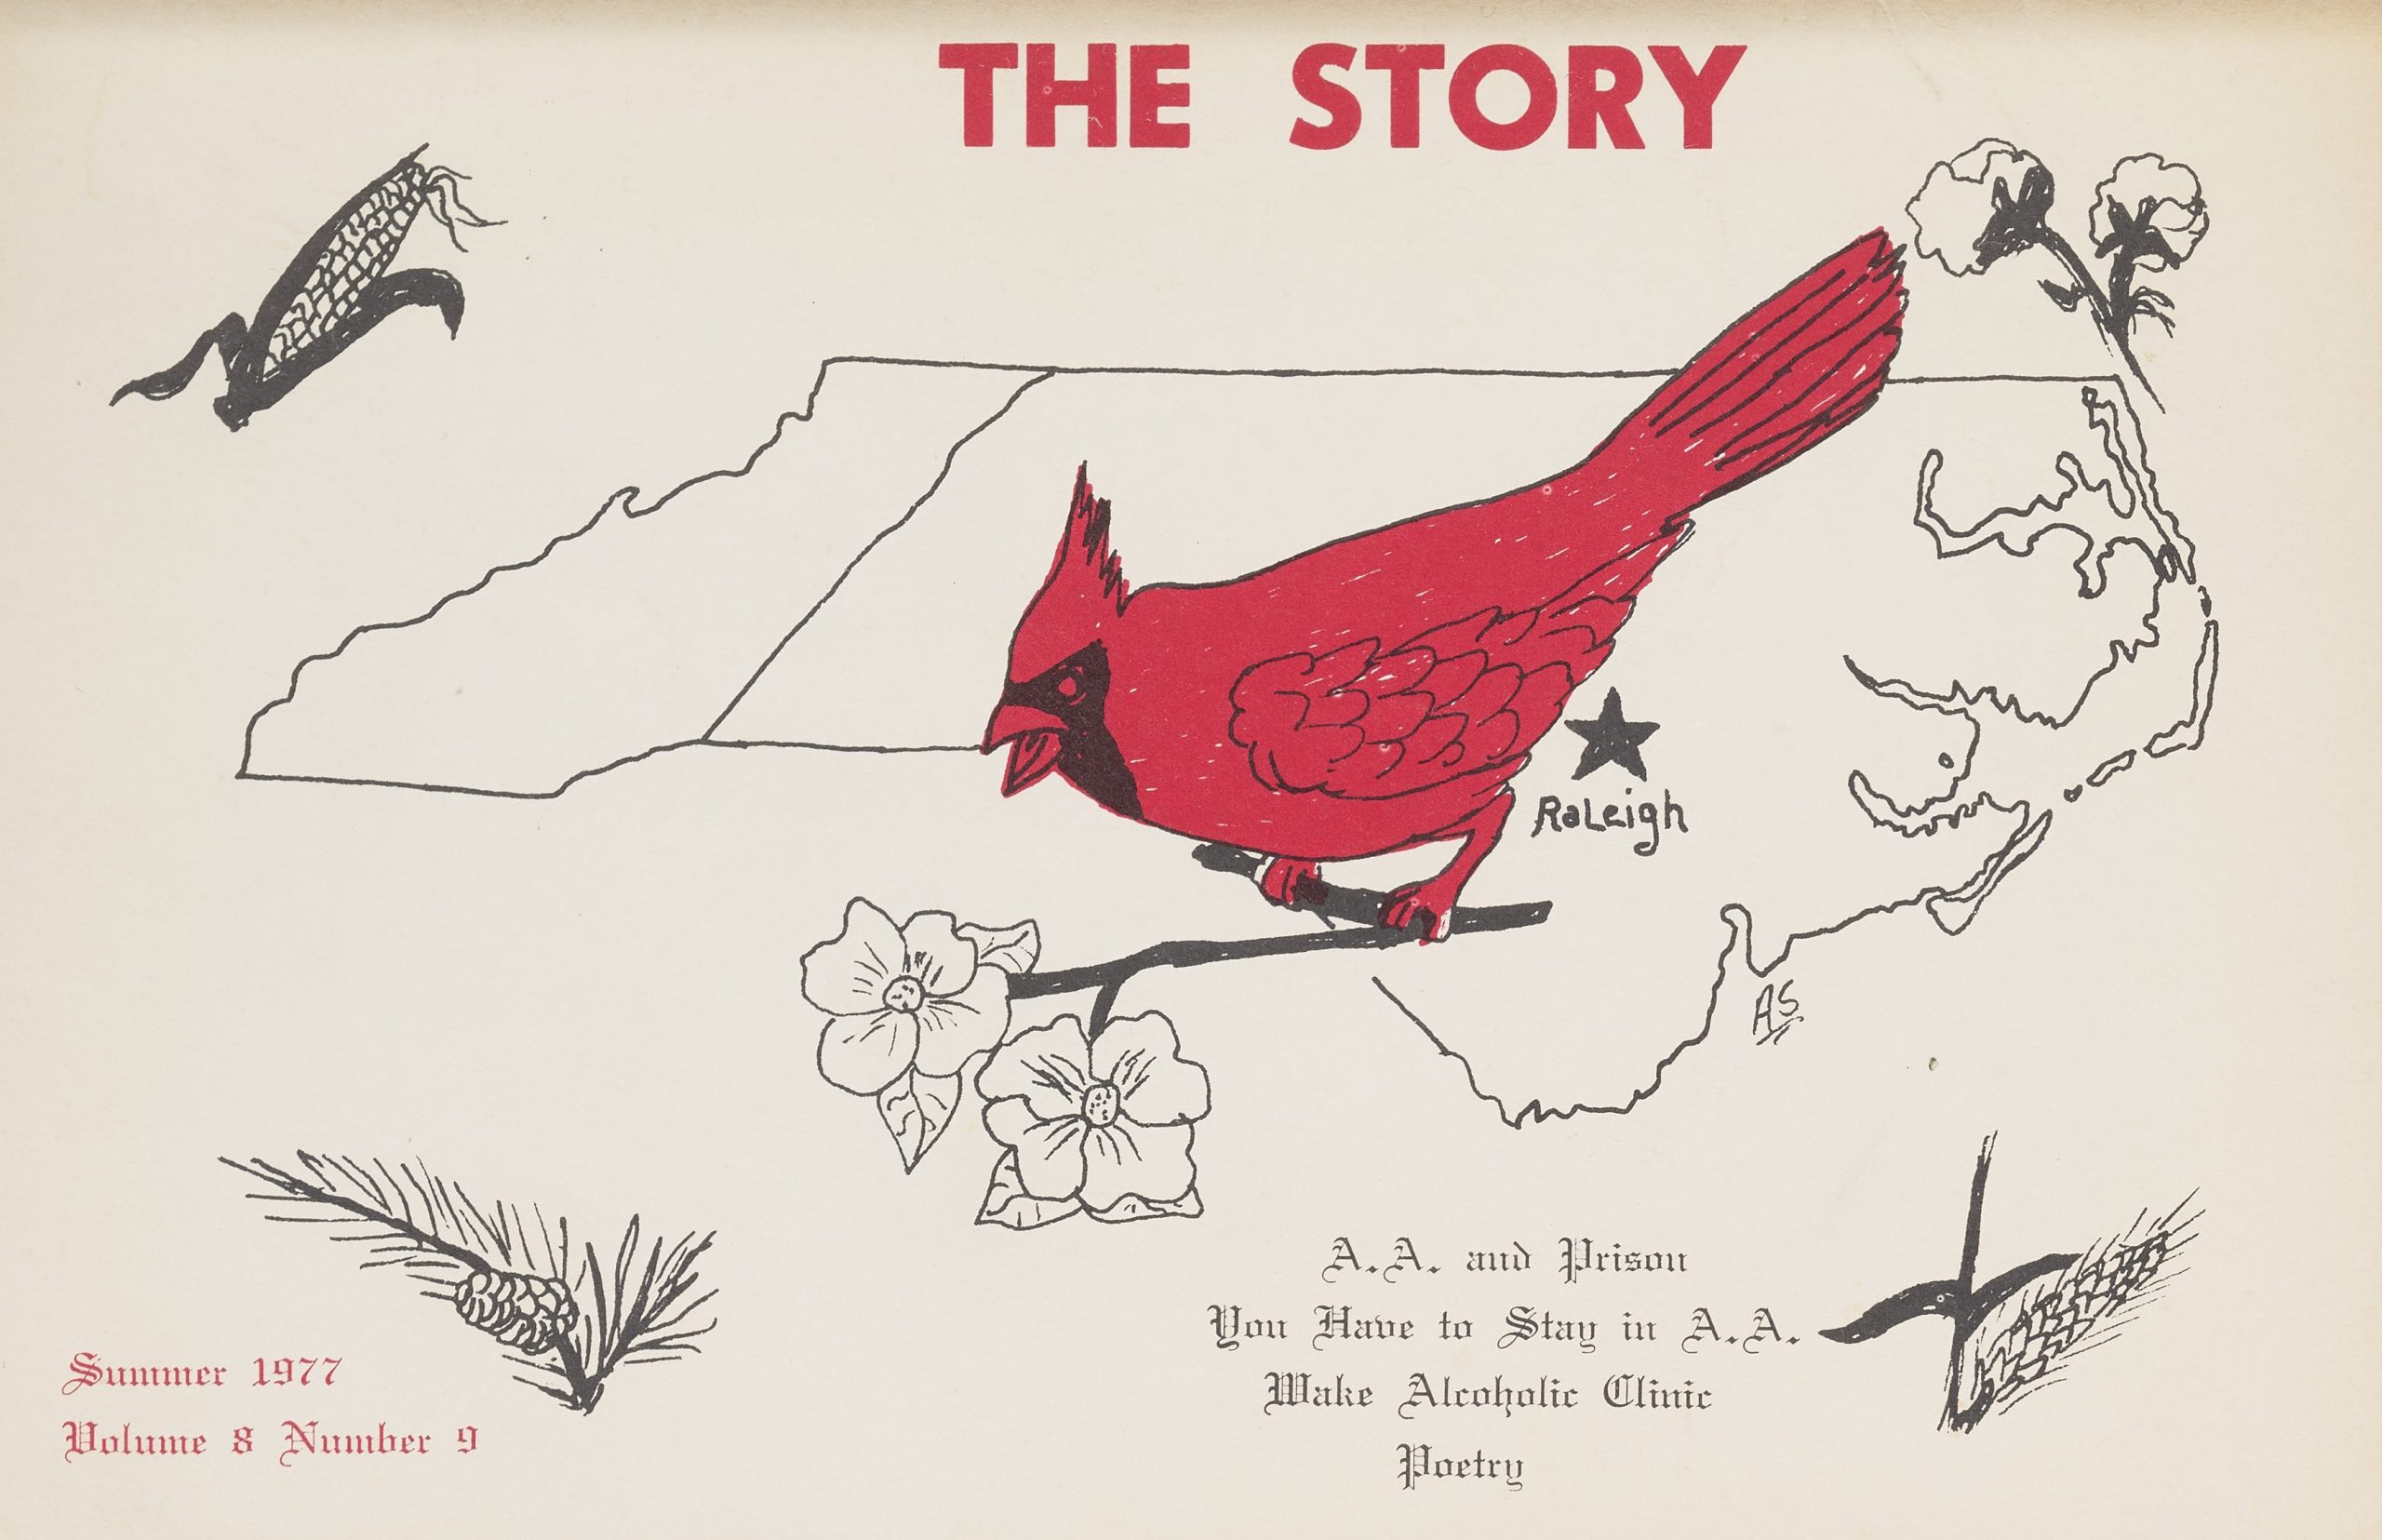 Cover for The Story, summer 1977 issue. It is a white background with an outline of North Carolina. The capital, Raleigh, is marked with a star. Surrounding the outline of the state is an ear of corn, pine tree branch, wheat, and cotton. In the center of the state there is a large, bright red cardinal sitting on a dogwood branch.